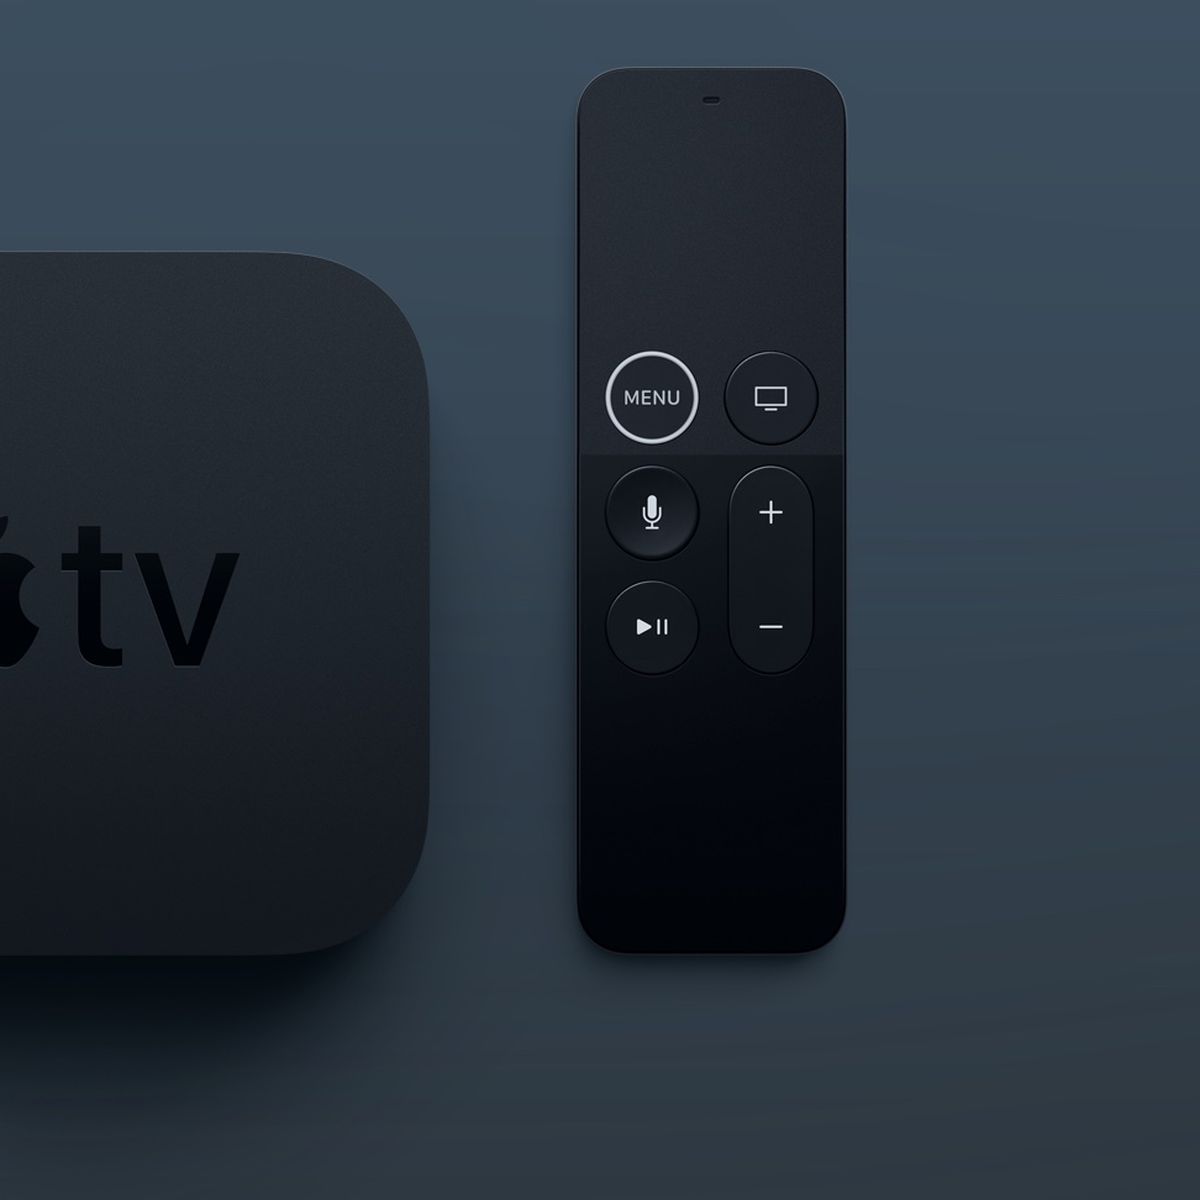 Rumors Persist of New Apple TV With Stronger Gaming Focus, Updated Faster Chip Next Year - MacRumors